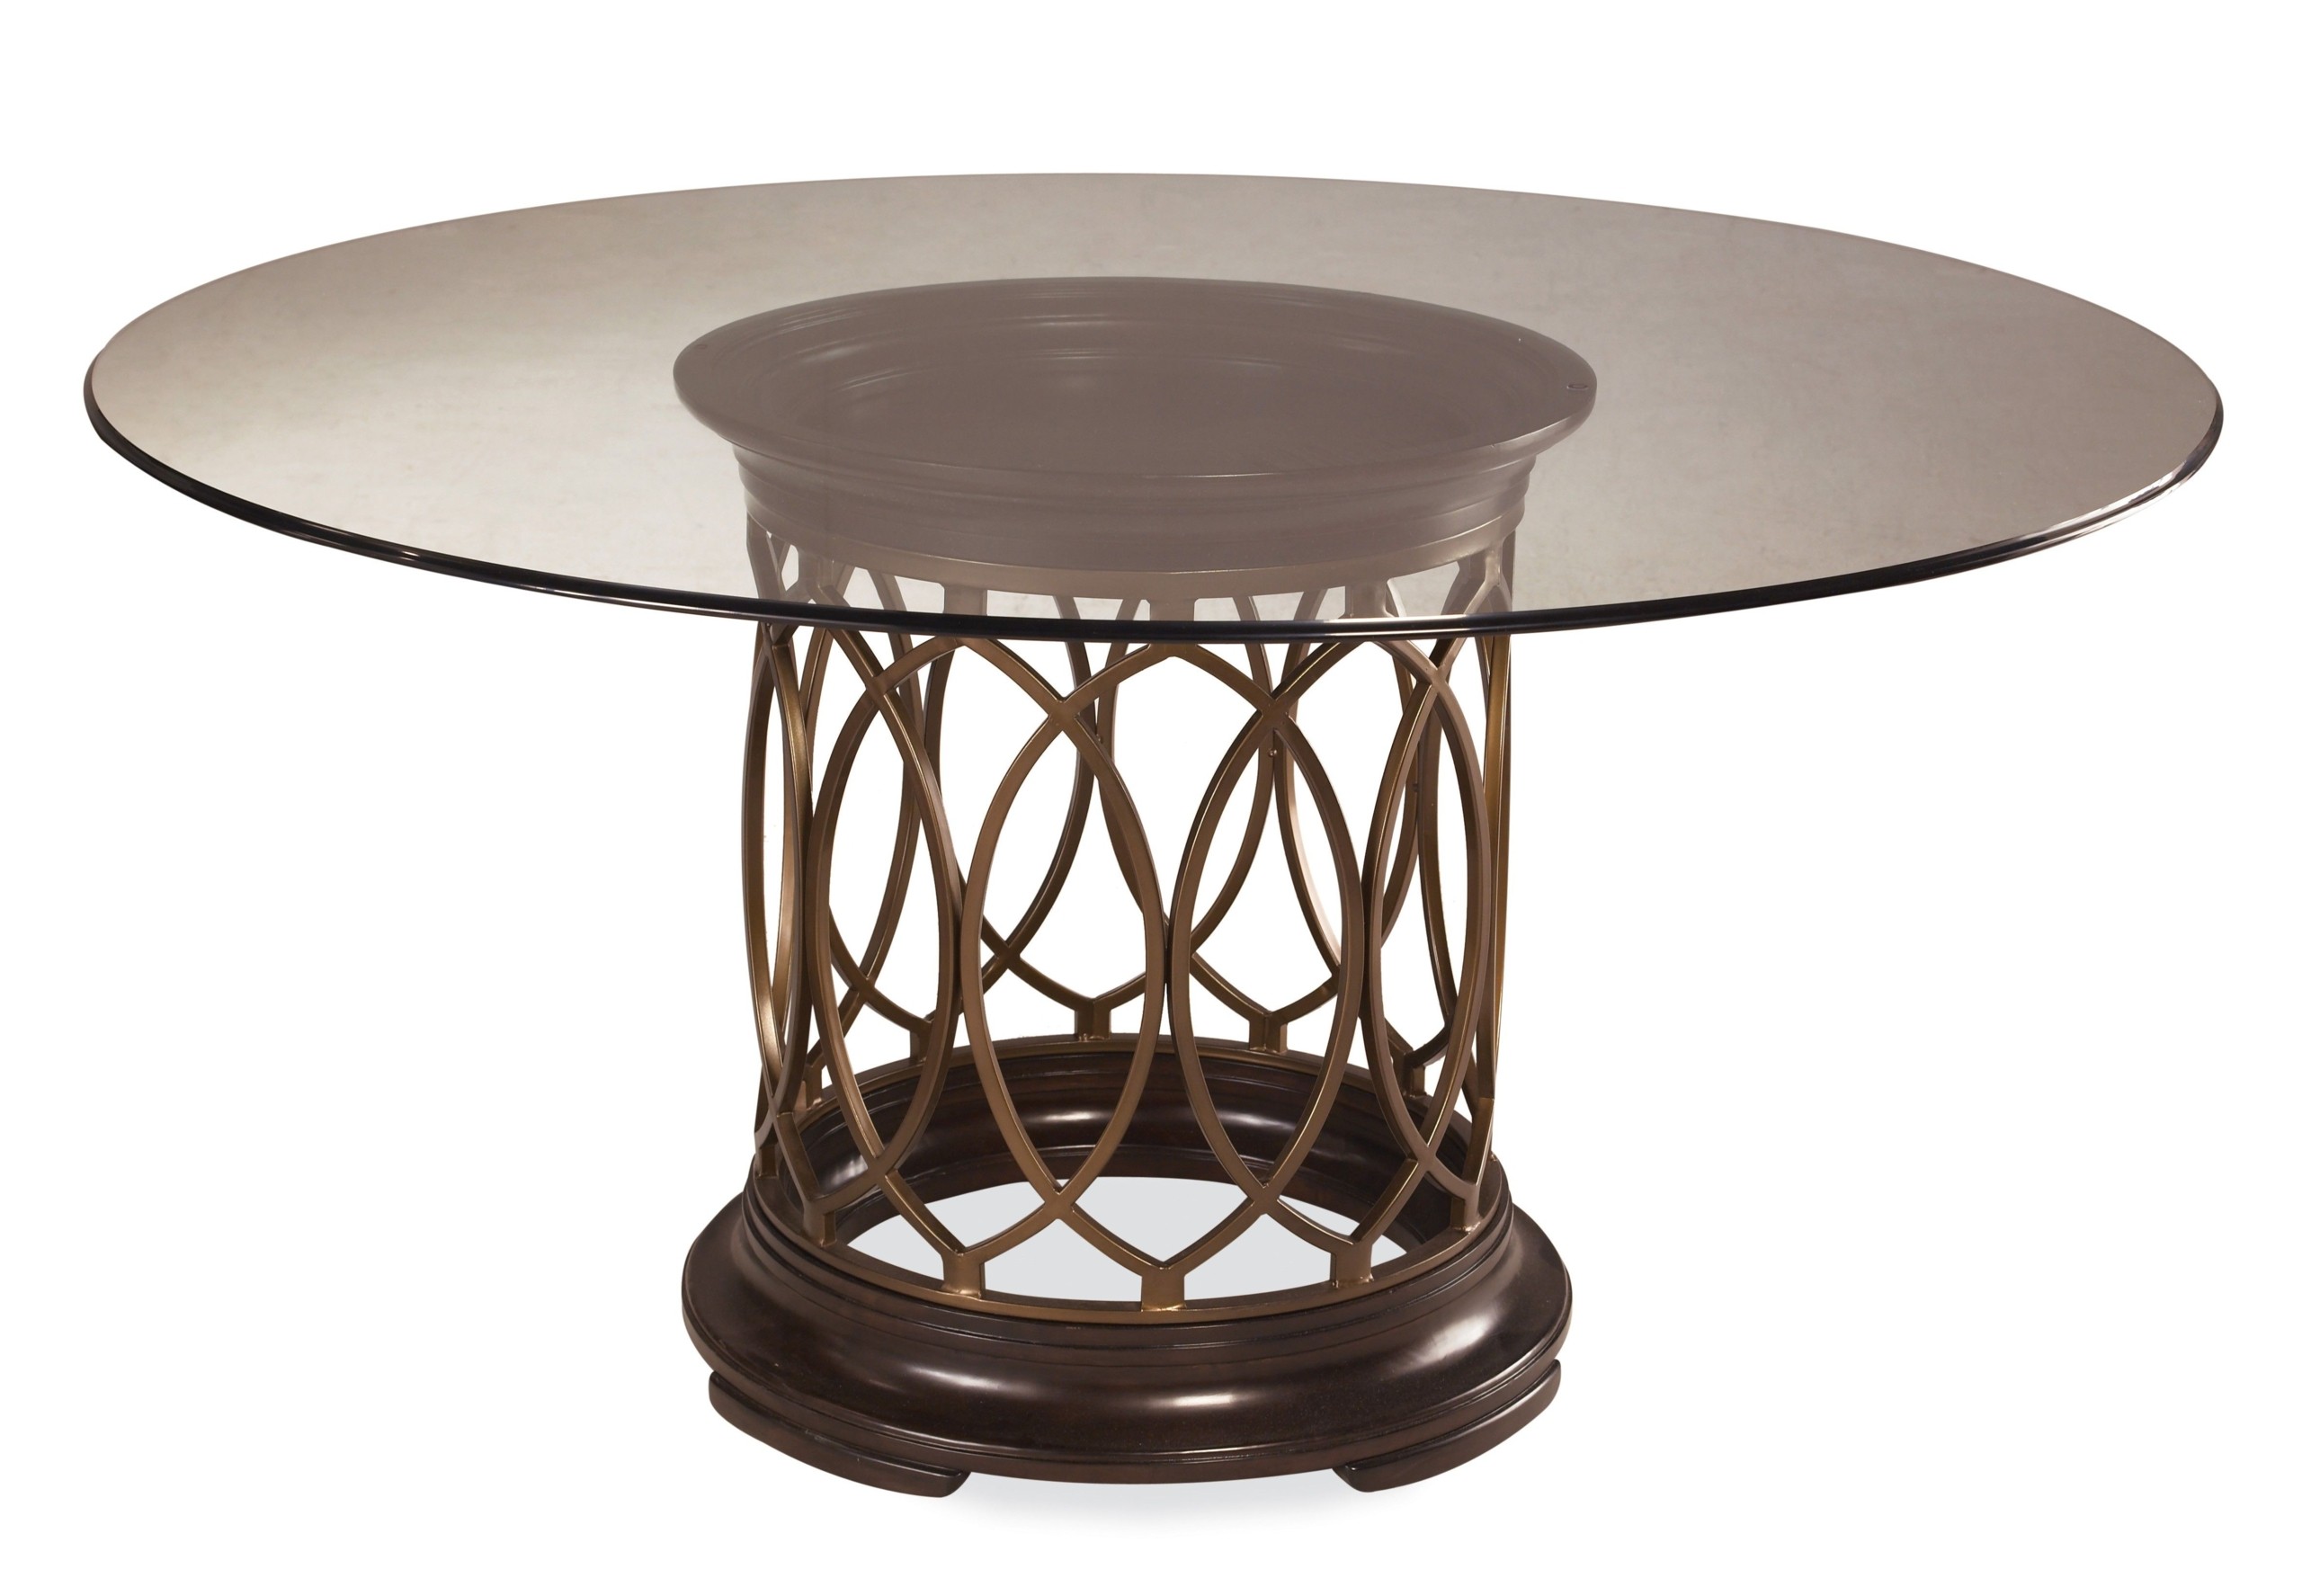 Dining room snazzy tempered round glass dining table with wooden